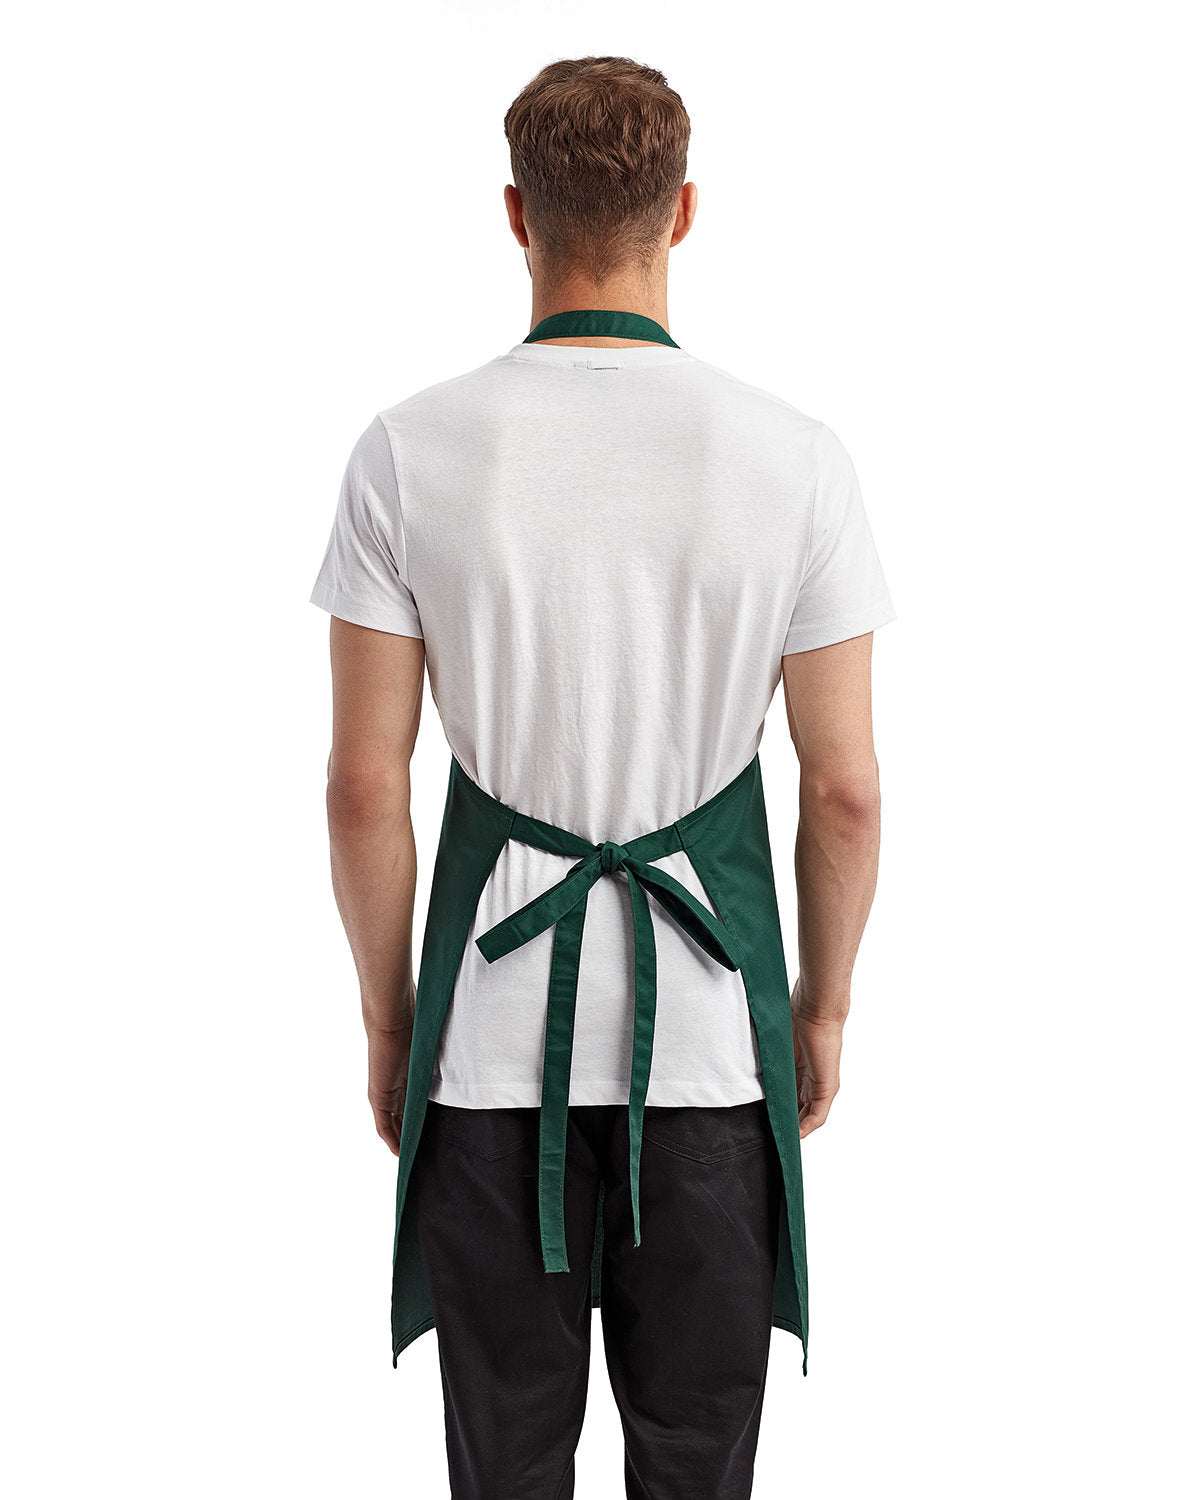 Restaurant Aprons with Your Company Name Embroidered - 3 Pack